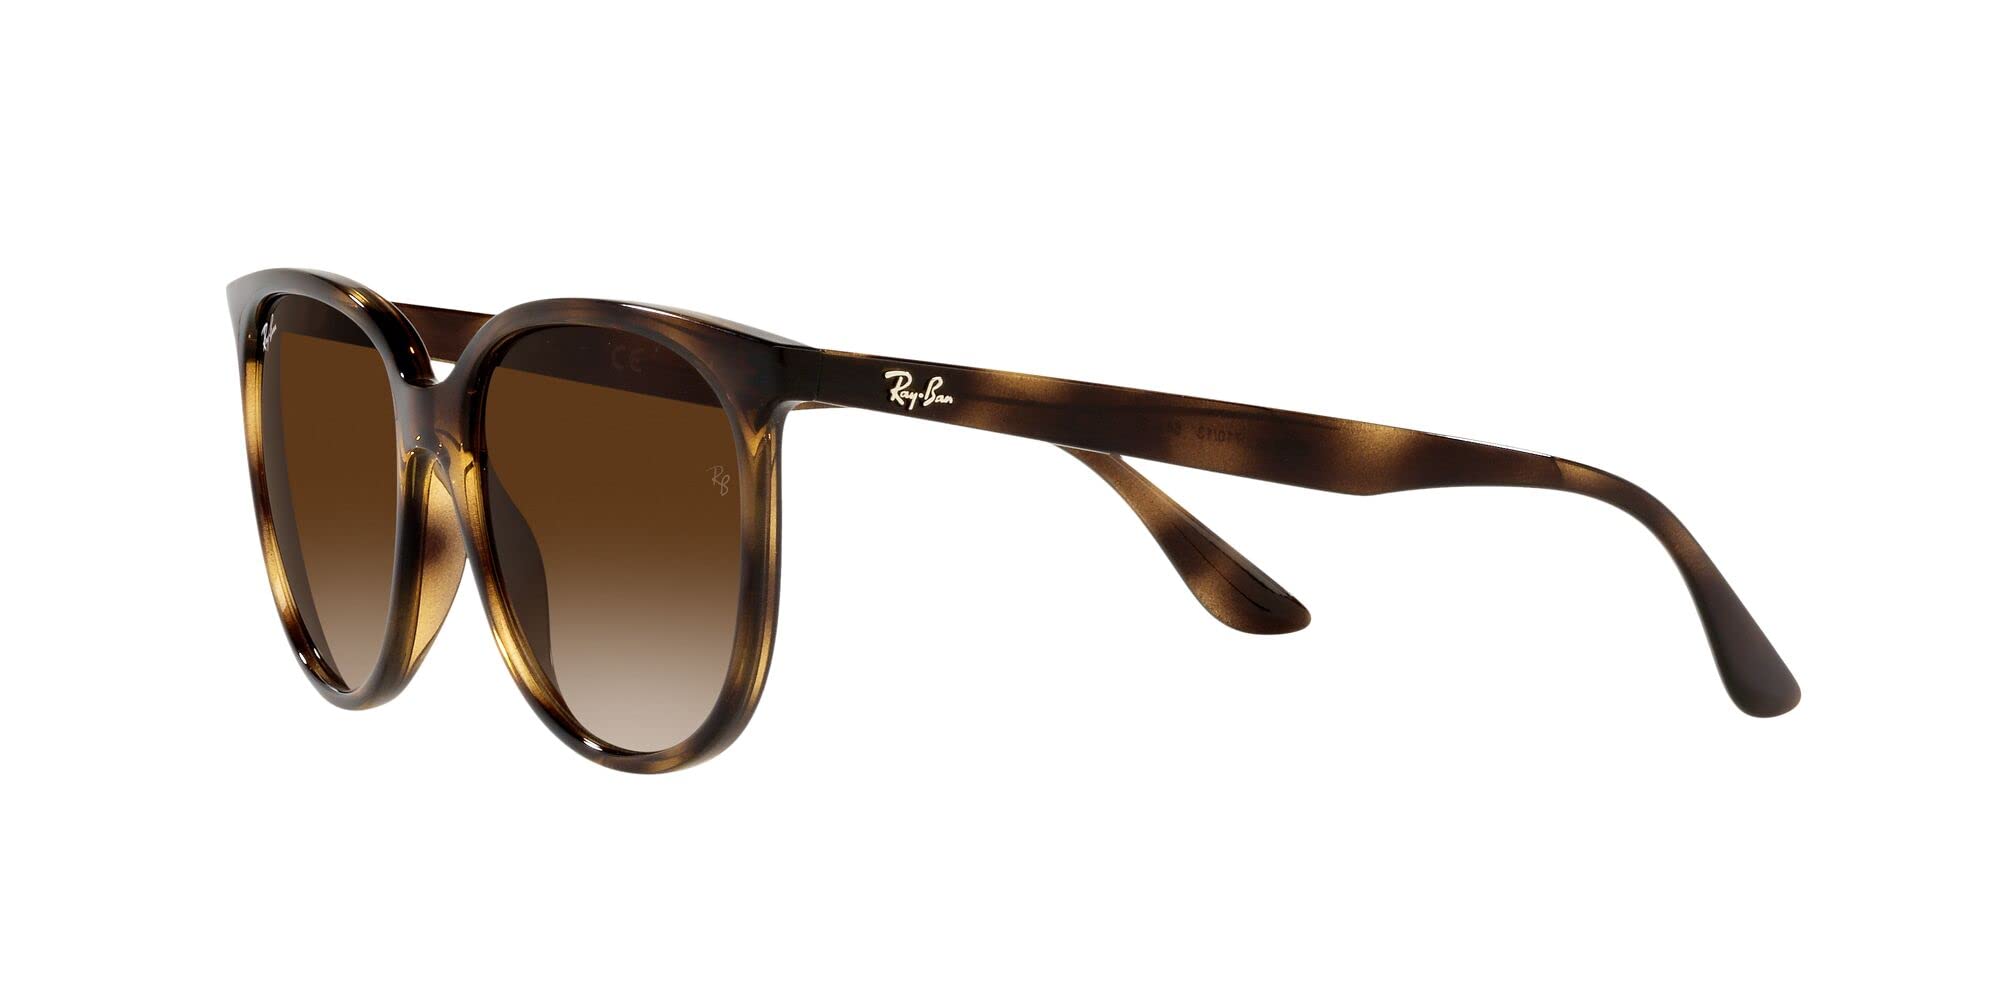 Ray-Ban Women's Rb4378 Square Sunglasses